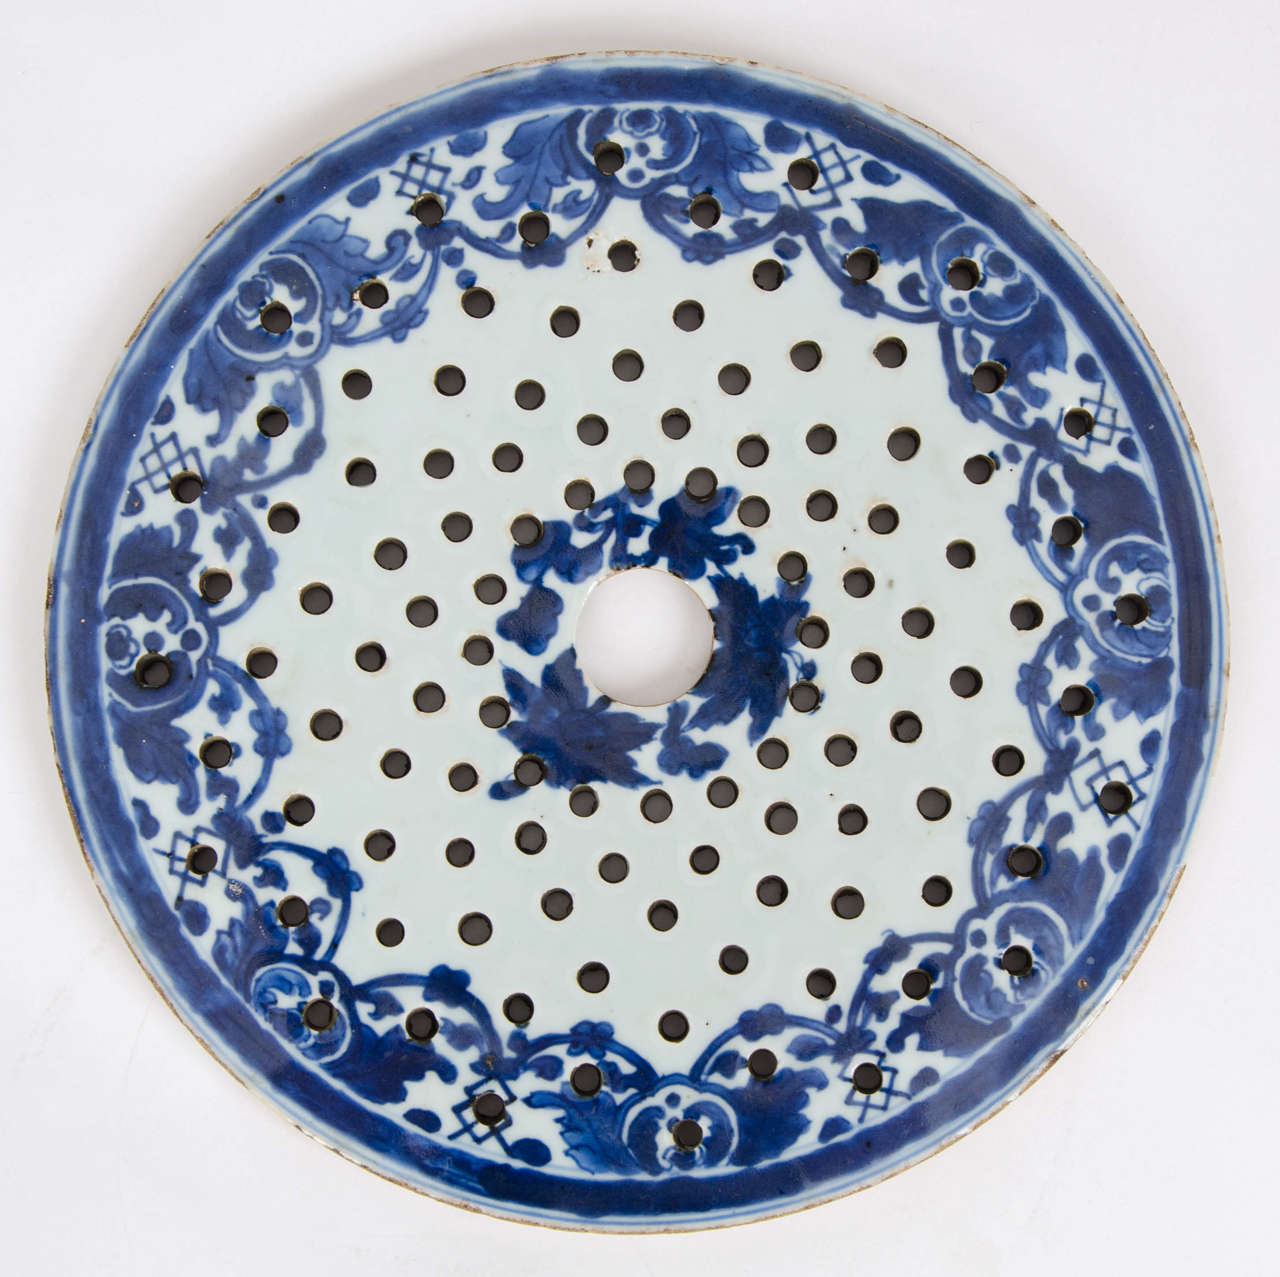 This is a good piece of Chinese blue and white porcelain, which we attribute to the late Ming dynasty but could be earlier.

The body is fairly granular and the glaze is thick with a bluish tinge, with the design in under-glaze blue.

The